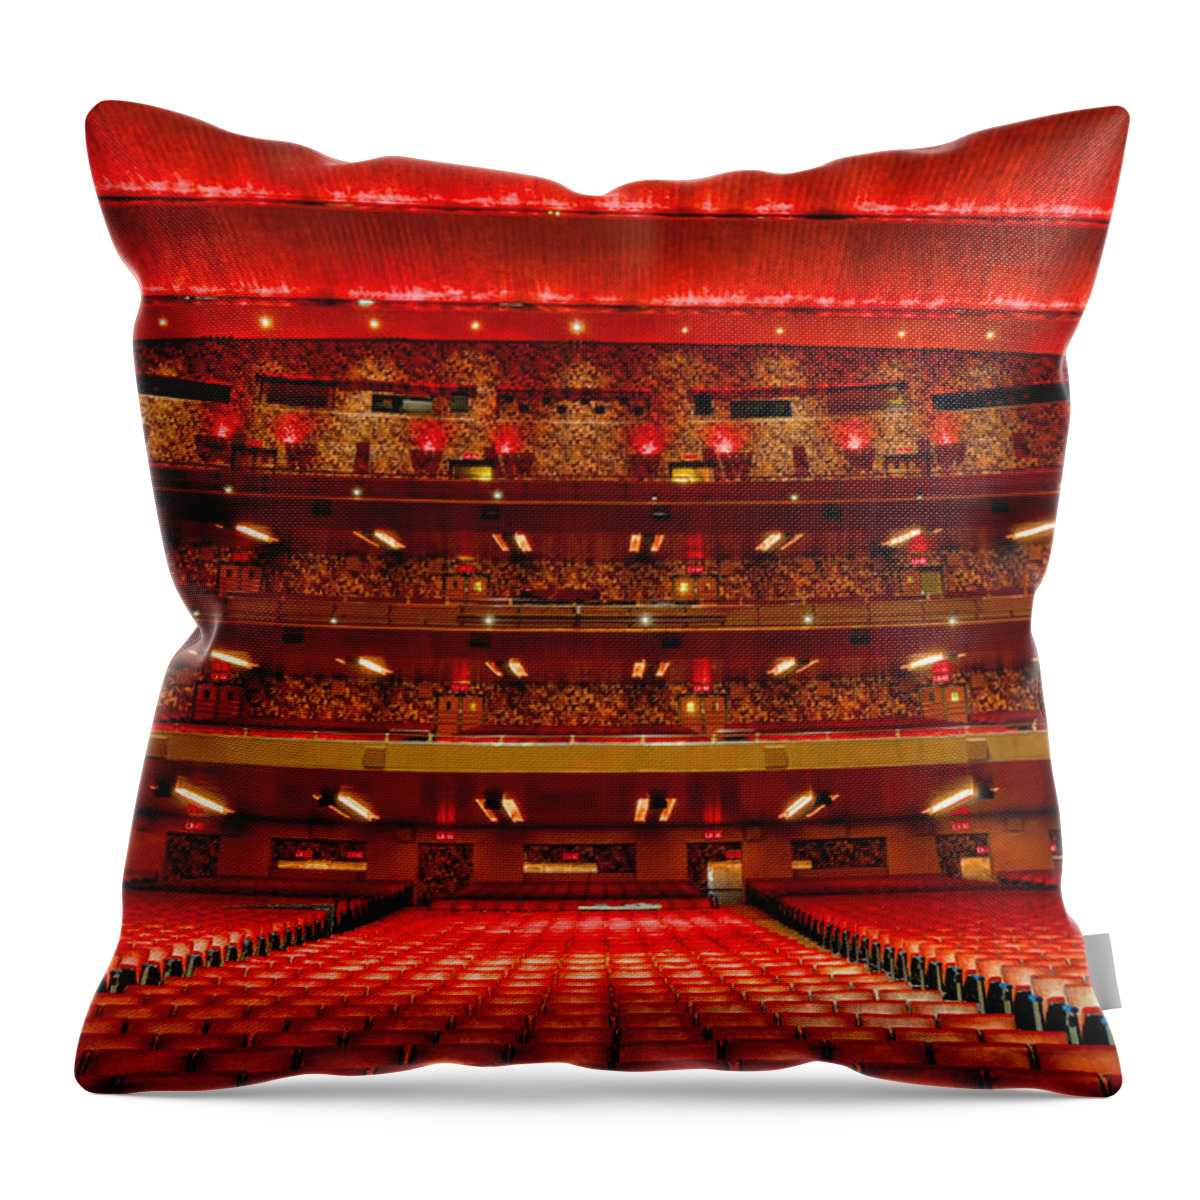 Radio City Music Hall Throw Pillow featuring the photograph A View From The Stage by Dave Mills